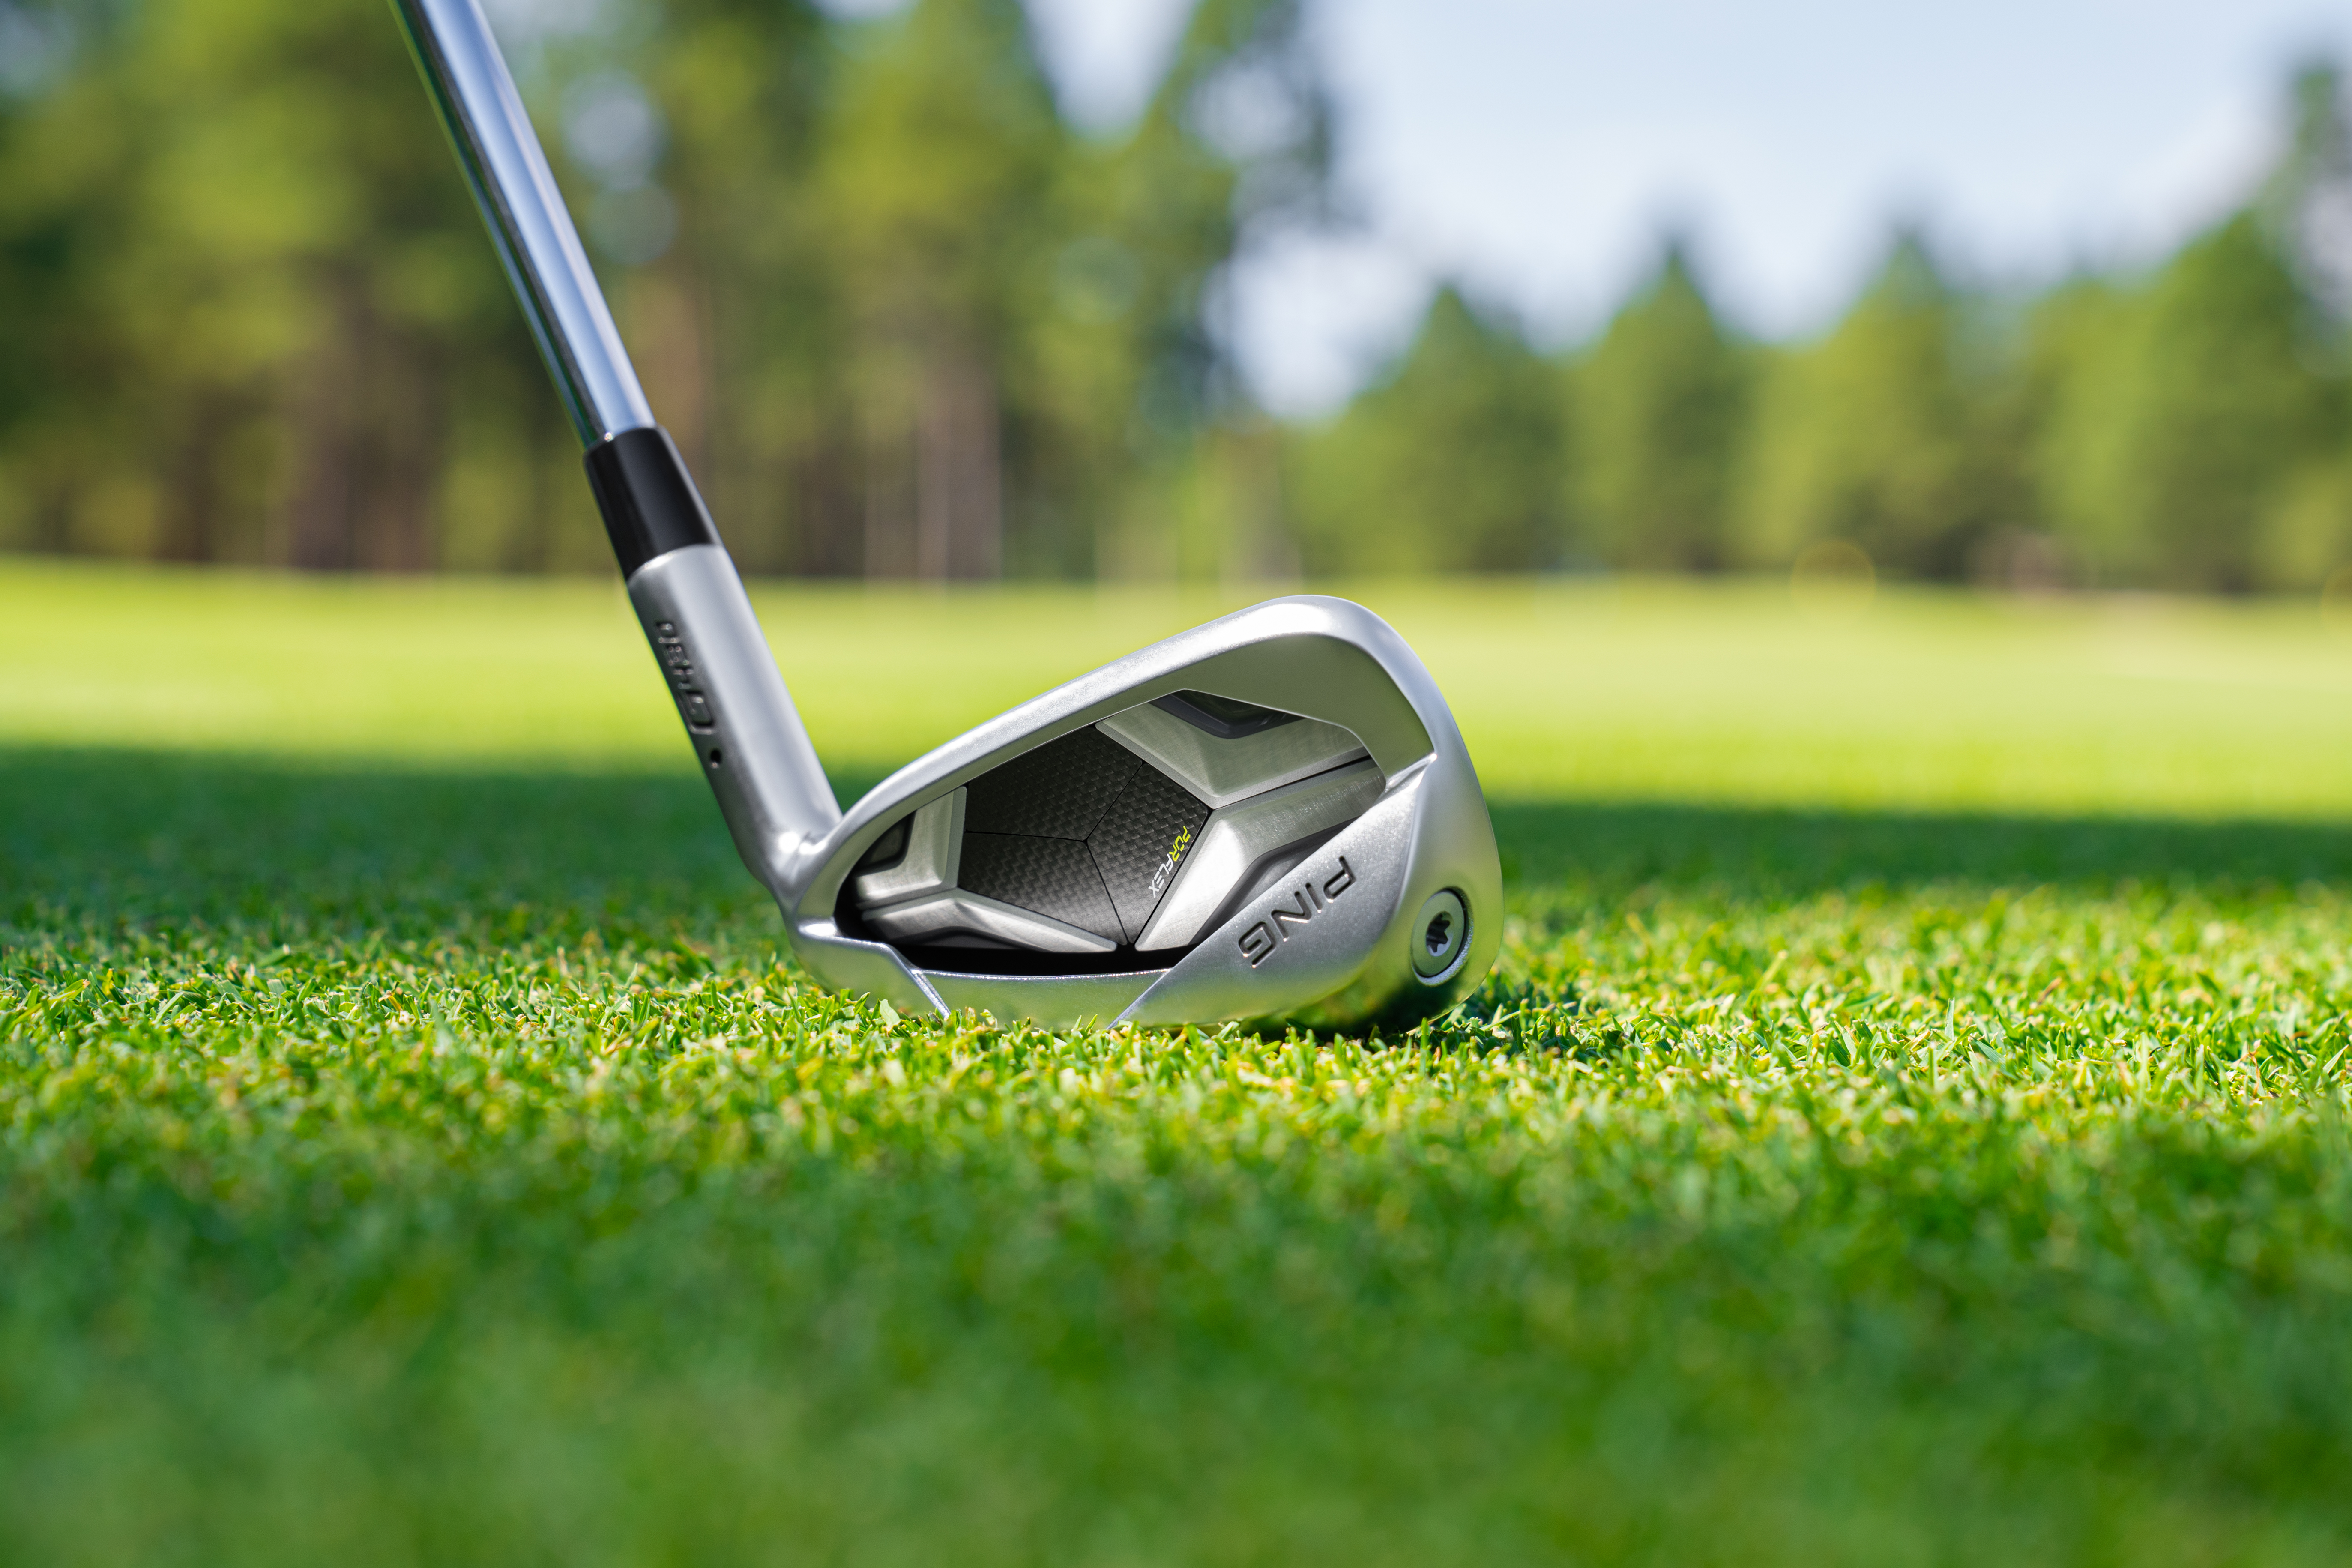 Ping G430 irons: What you need to know | Golf Equipment: Clubs